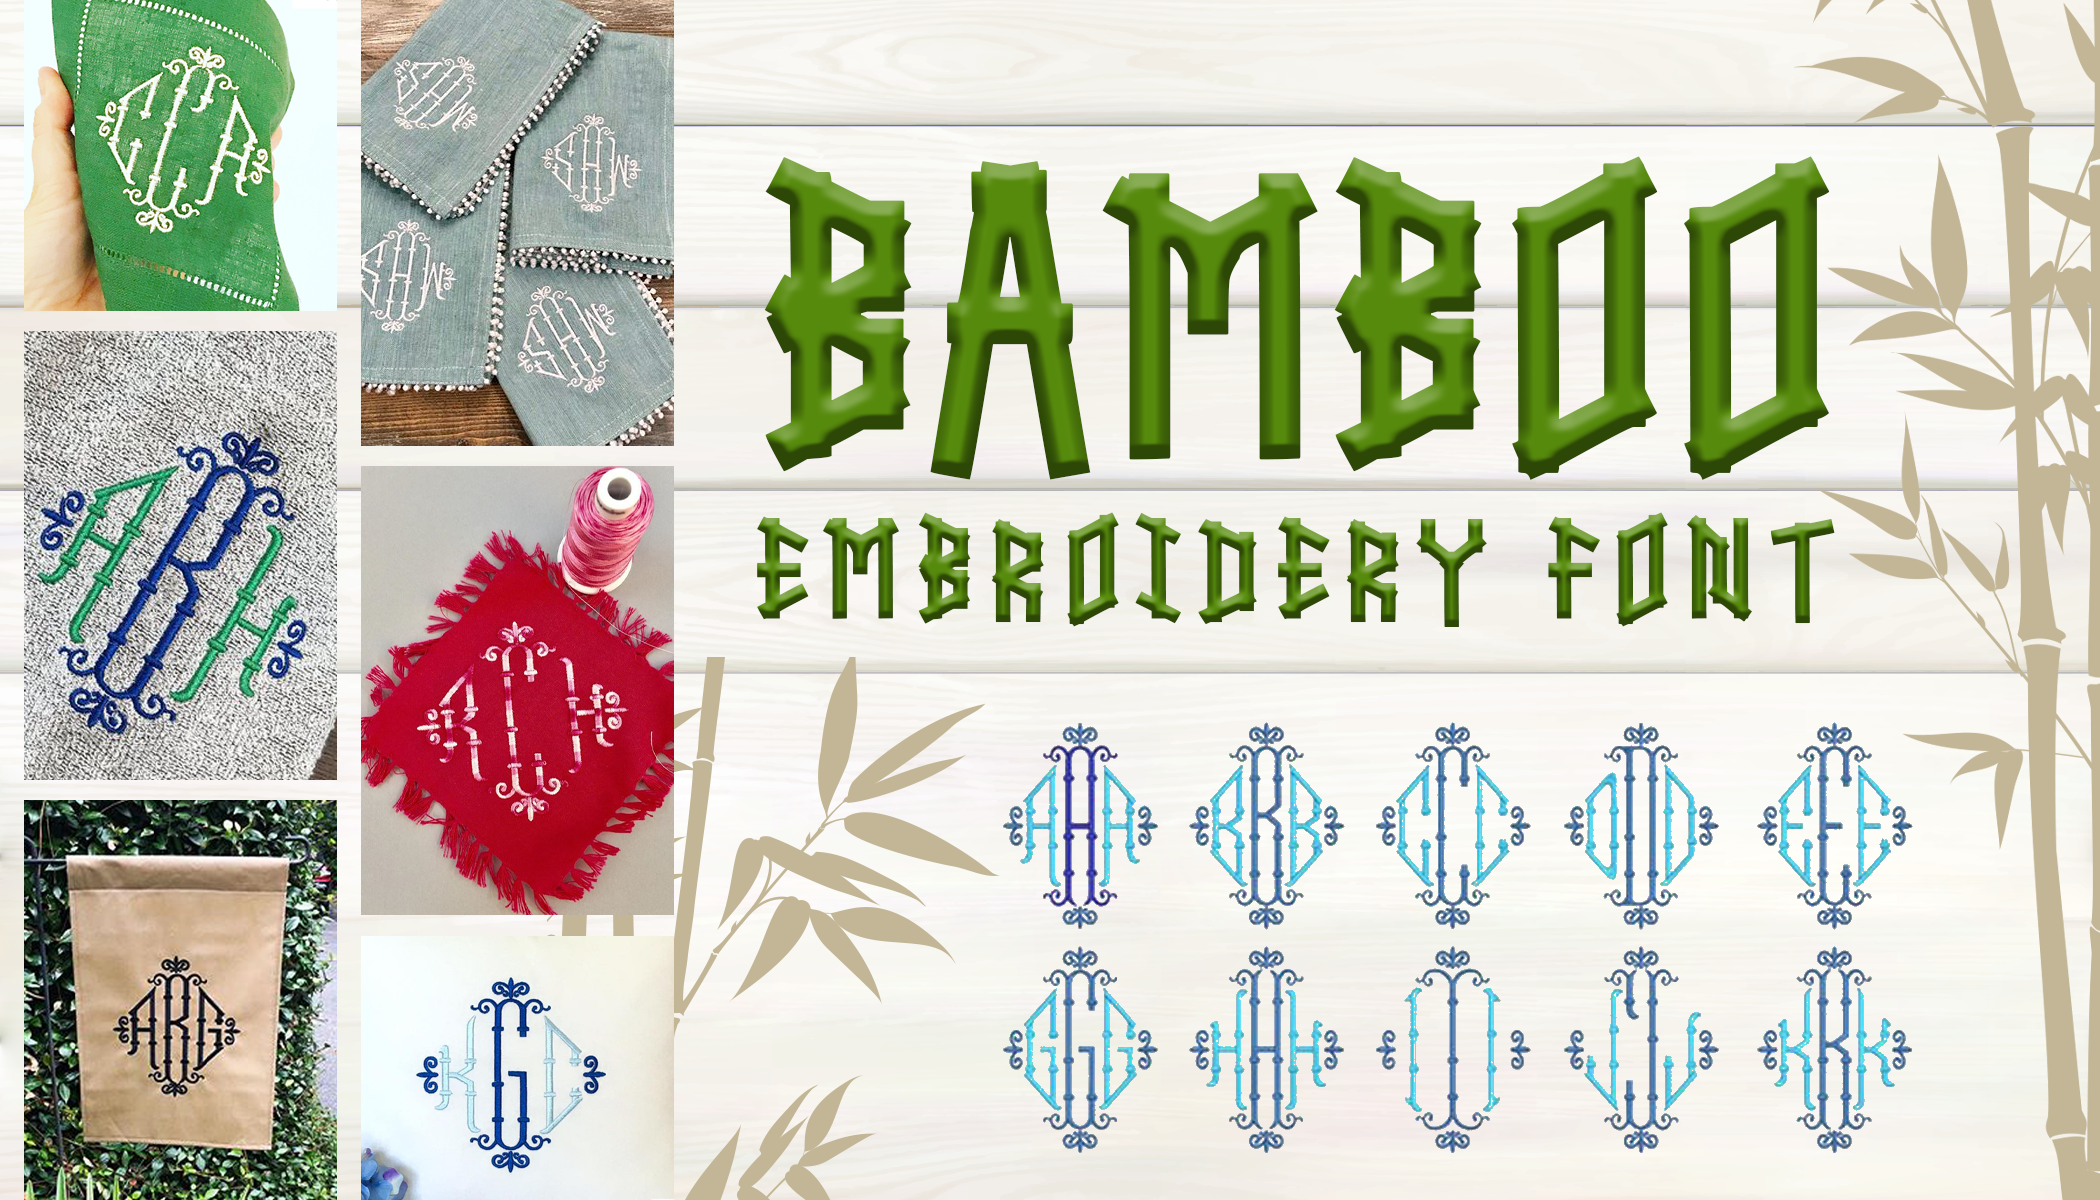 Ideas for Bamboo Embroidery Font